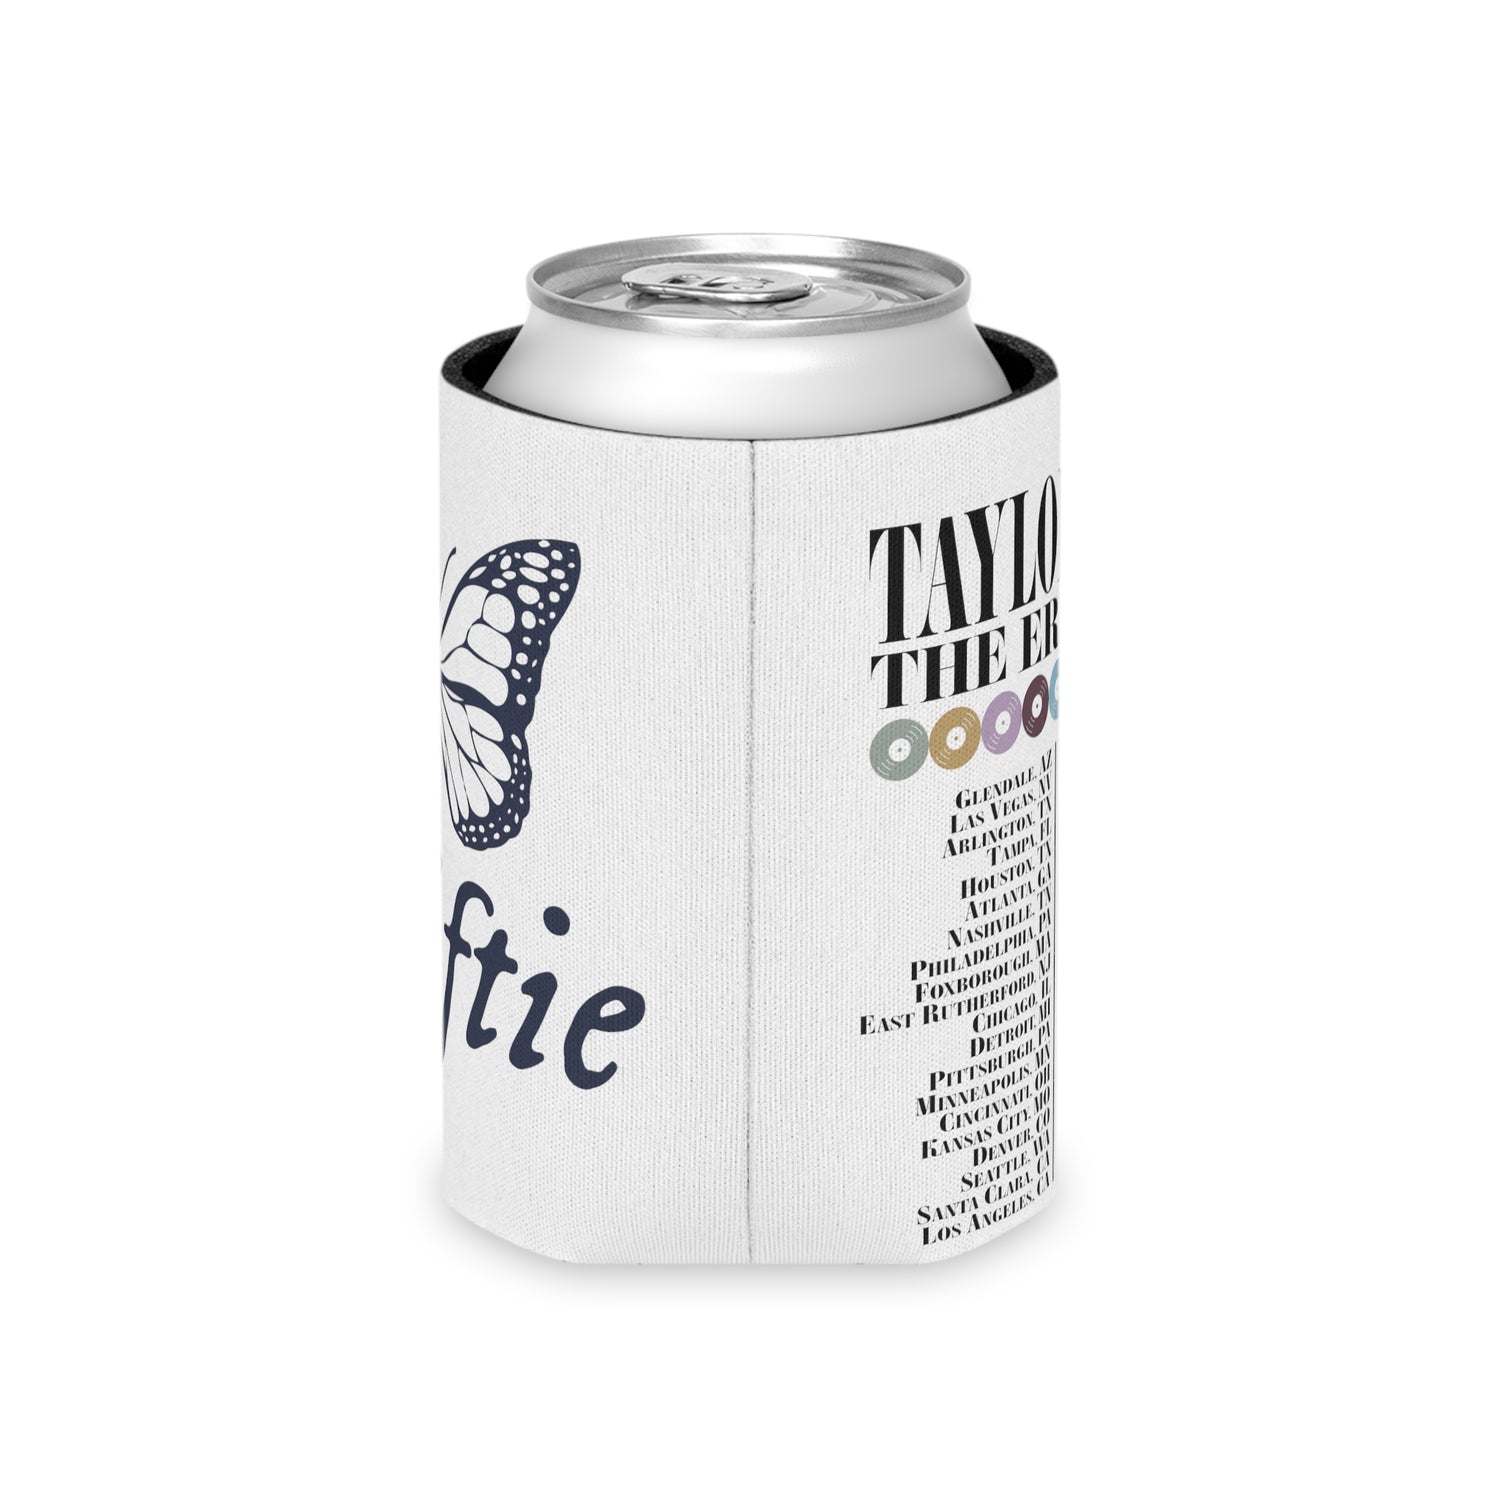 READY TO SHIP Beer Thirty Wine O'Clock White Slim Can Koozie